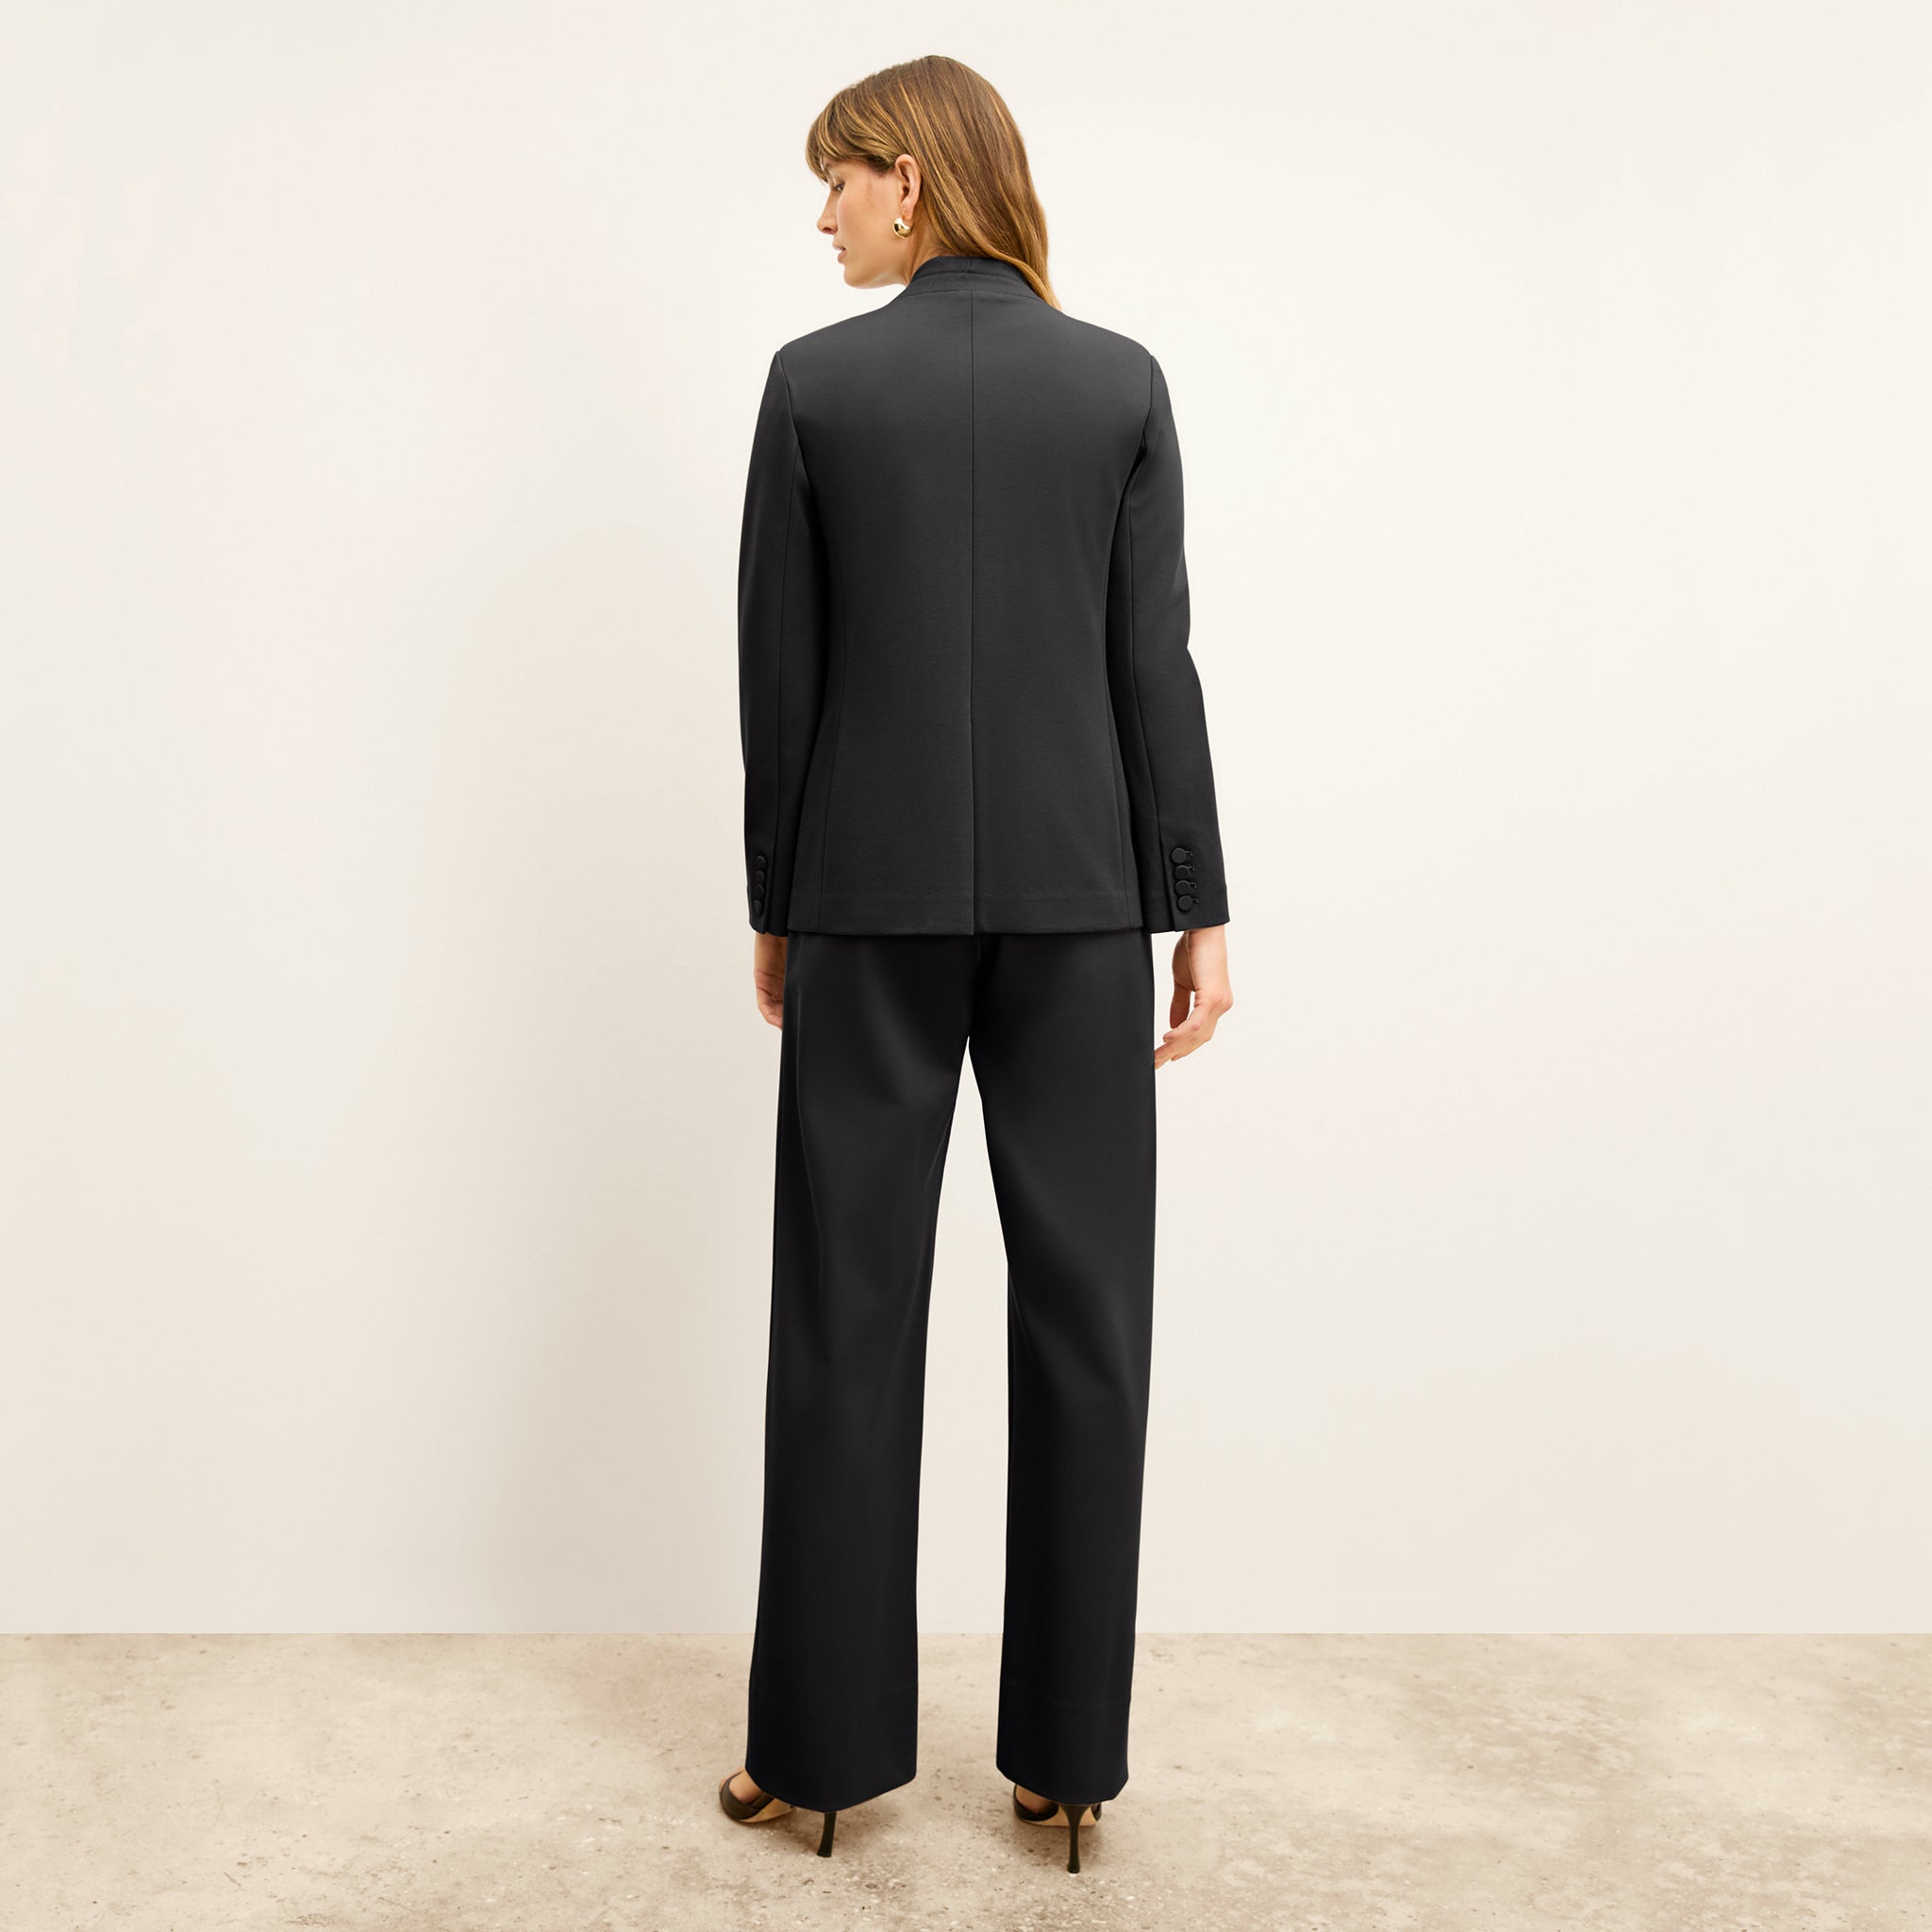 back image of a woman wearing the janette blazer in black